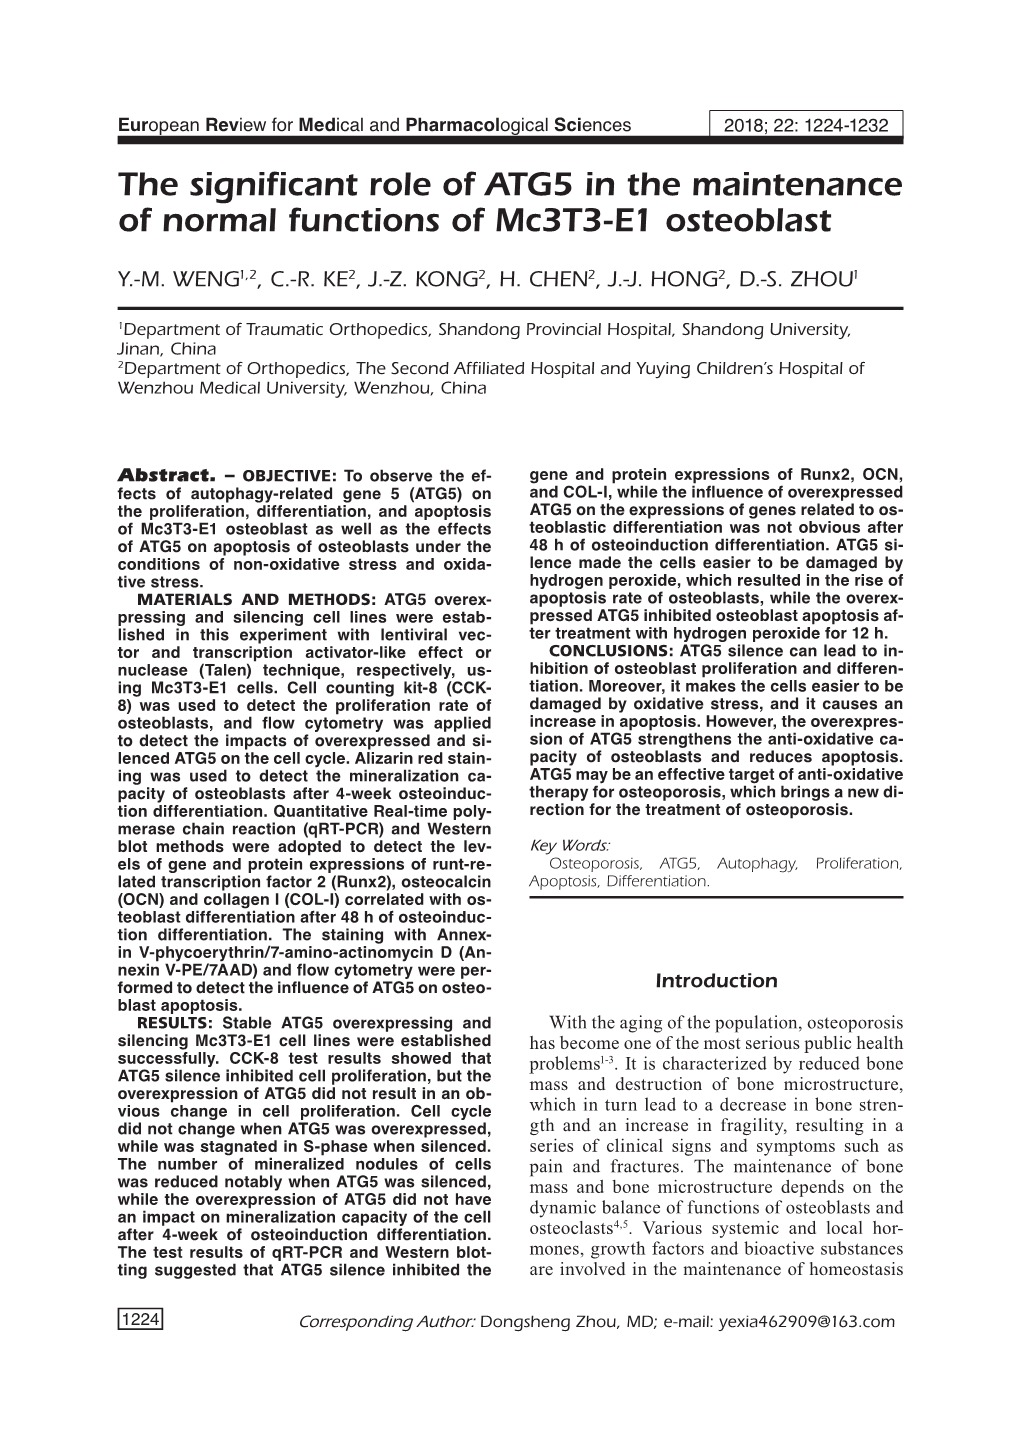 The Significant Role of ATG5 in the Maintenance of Normal Functions of Mc3t3-E1 Osteoblast